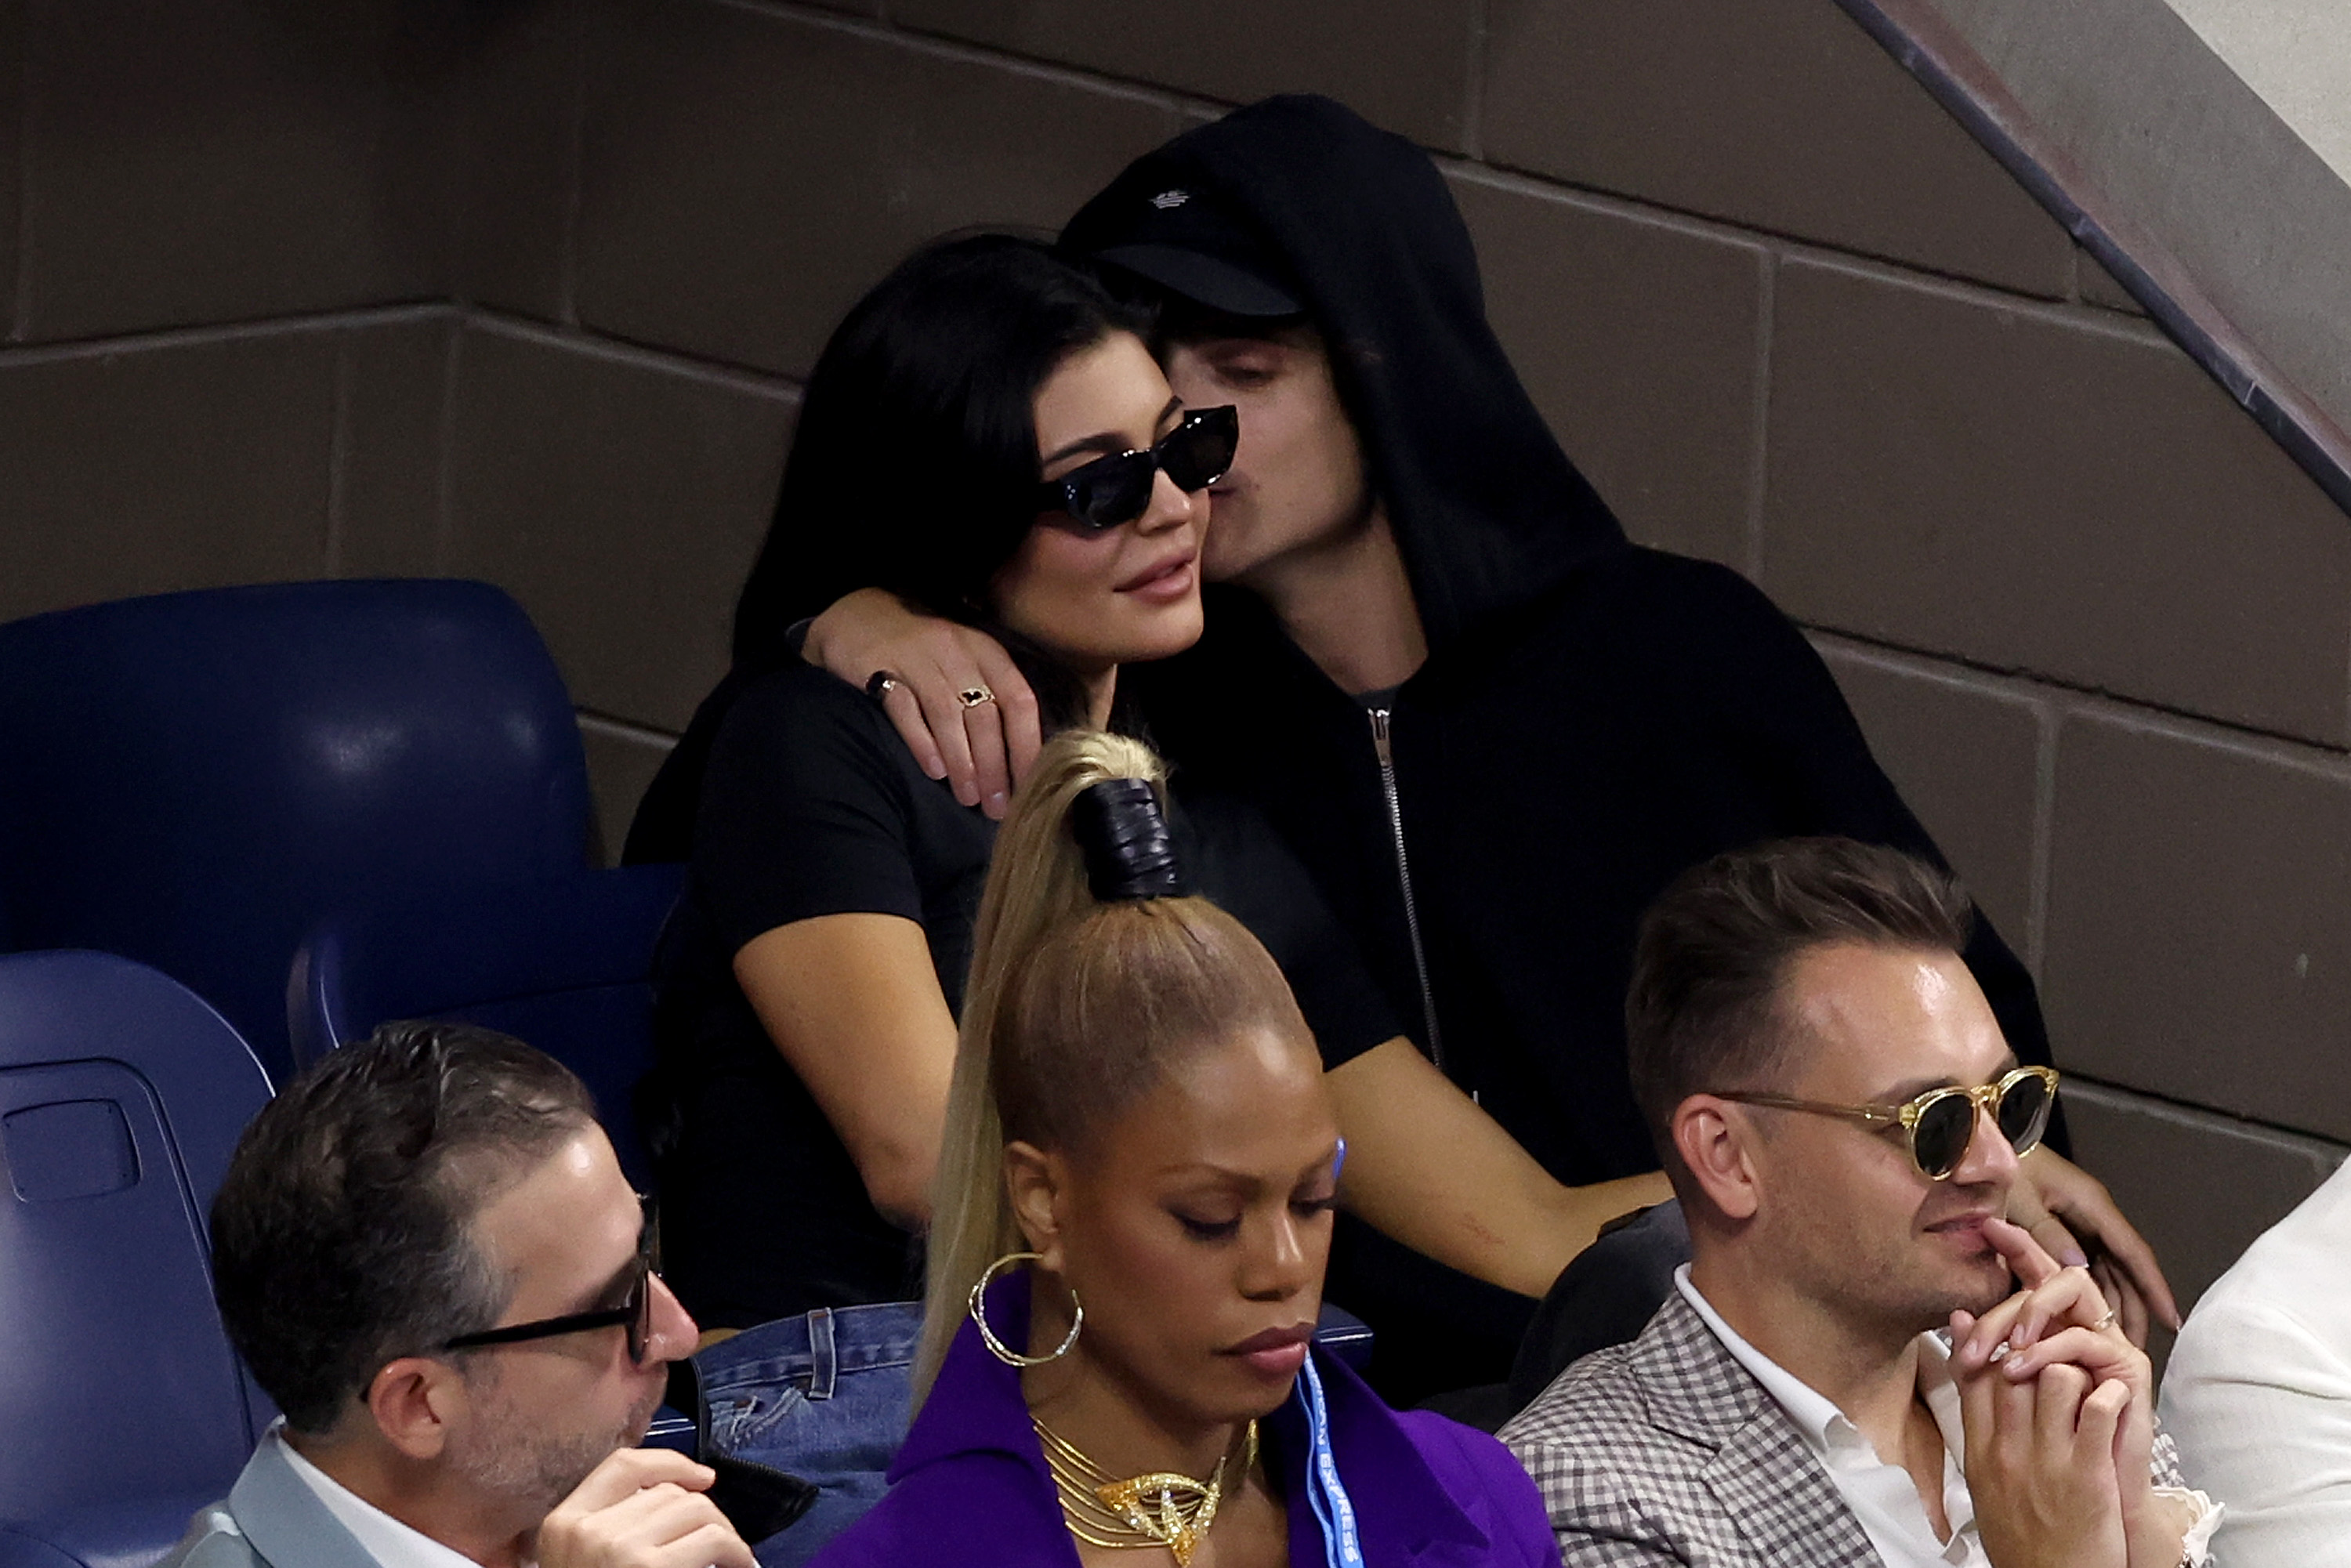 Kylie Jenner and actor Timothée Chalamet look on during the Men's Singles Final match between Novak Djokovic of Serbia and Daniil Medvedev of Russia on Day Fourteen of the 2023 US Open at the USTA Billie Jean King National Tennis Center on September 10, 2023 in the Flushing neighborhood of the Queens borough of New York City.